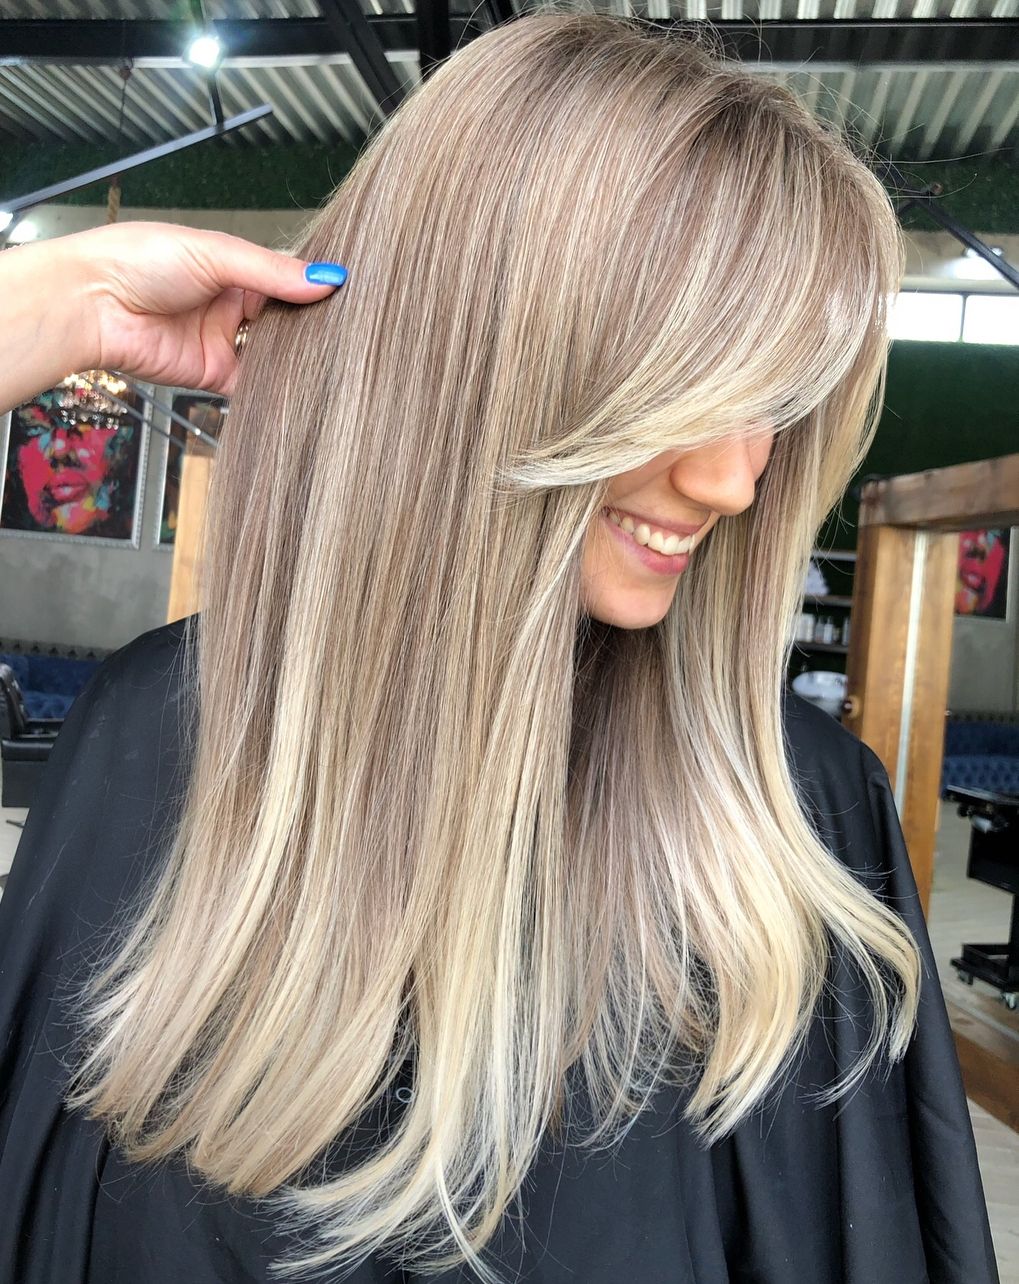 35 Instagram Popular Ways To Pull Off Long Hair With Bangs With Regard To 2017 Forward Swept Straight Shag Haircuts (View 12 of 20)